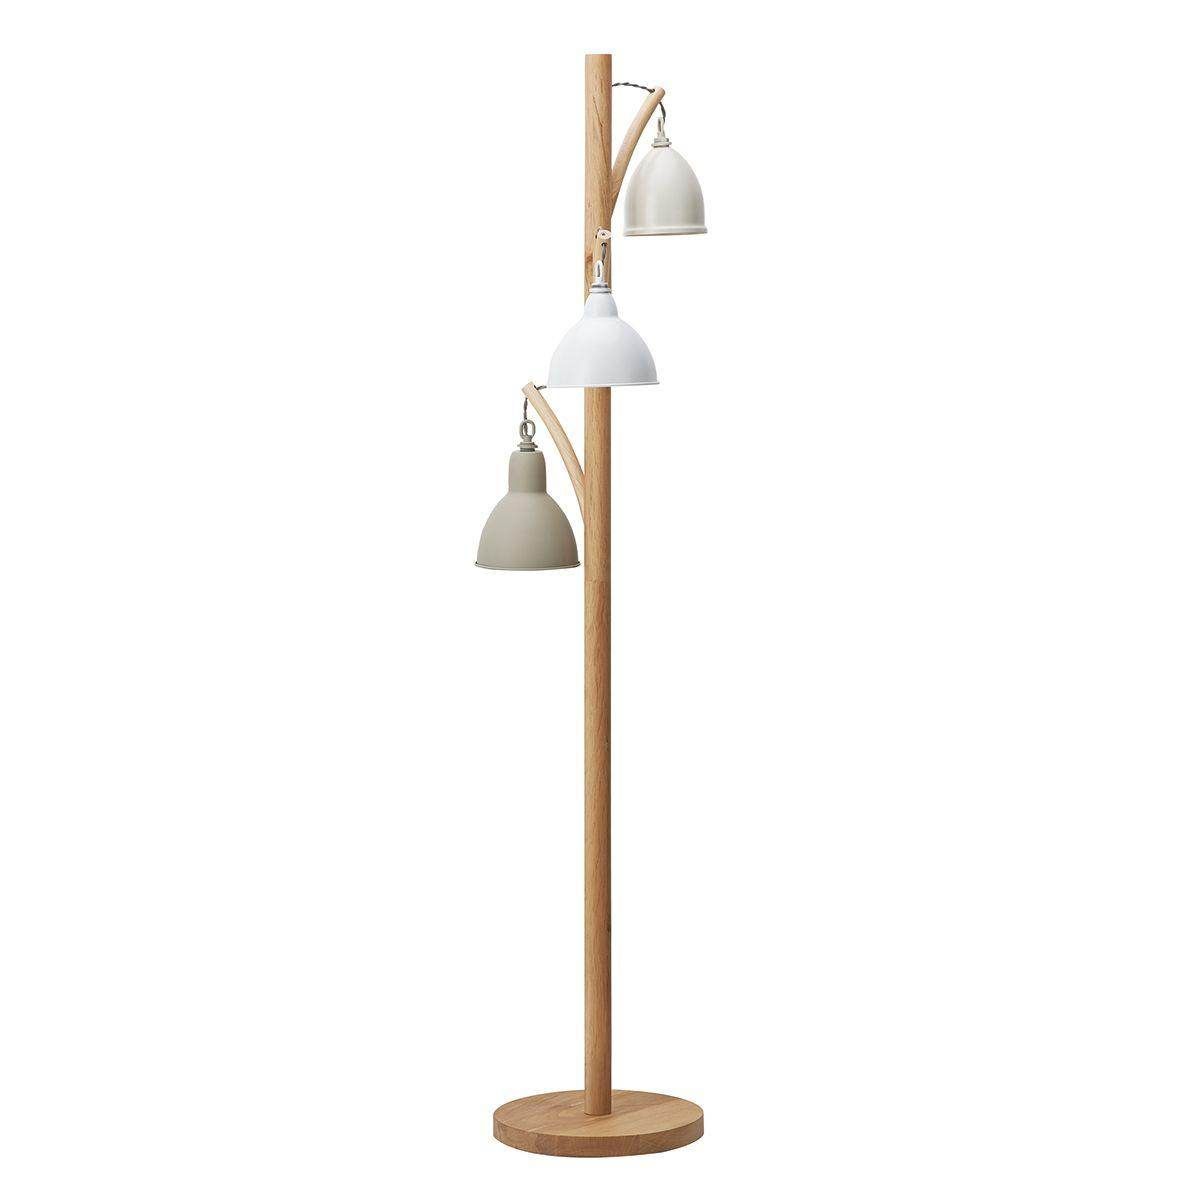 Dar Blyton 3 Light Floor Lamp complete with Painted Shade - Cusack Lighting